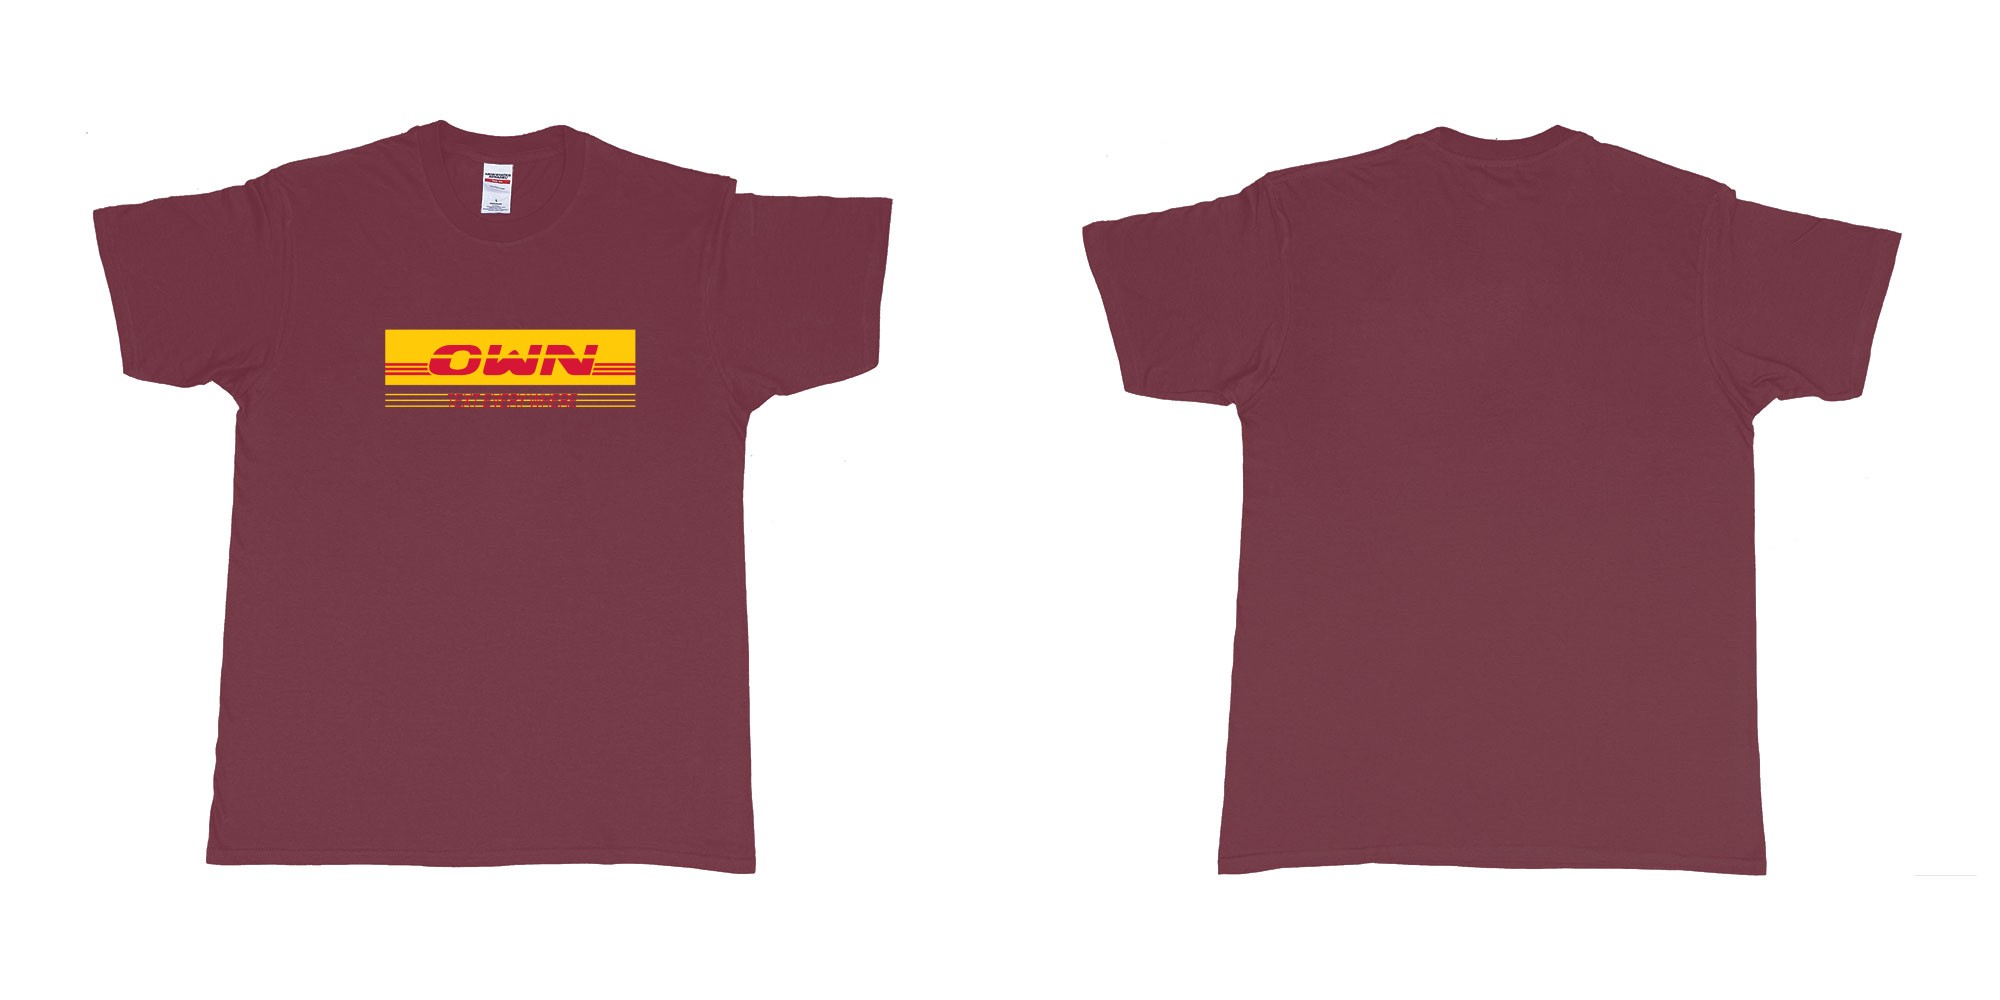 Custom tshirt design DHL in fabric color marron choice your own text made in Bali by The Pirate Way